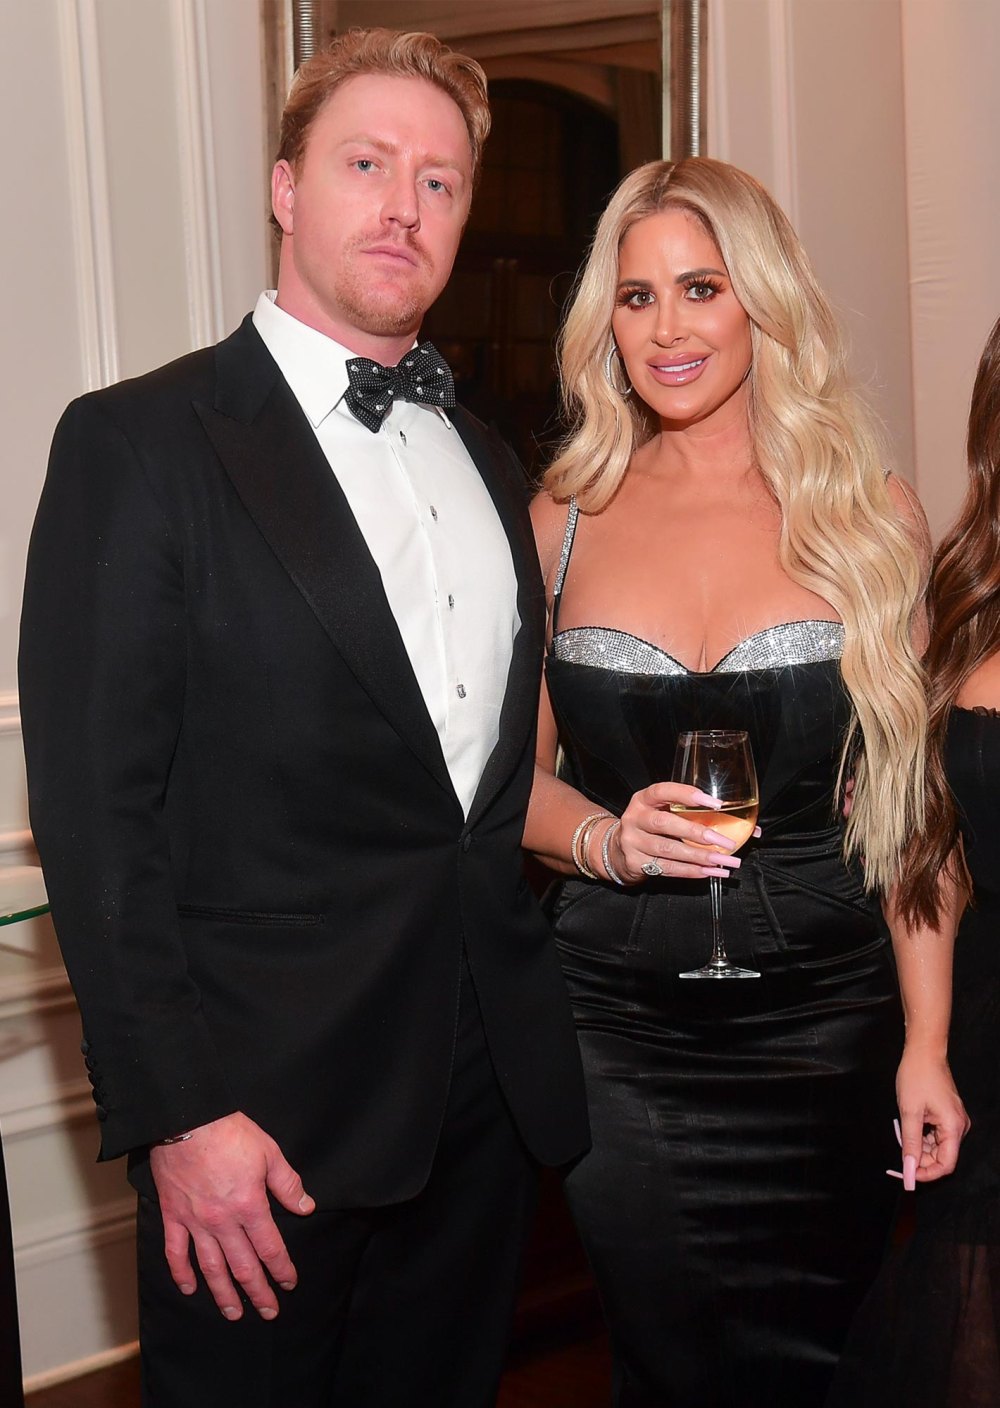 Judge Calls Hearing a Waste After Kim Zolciak Fails to Appear 360